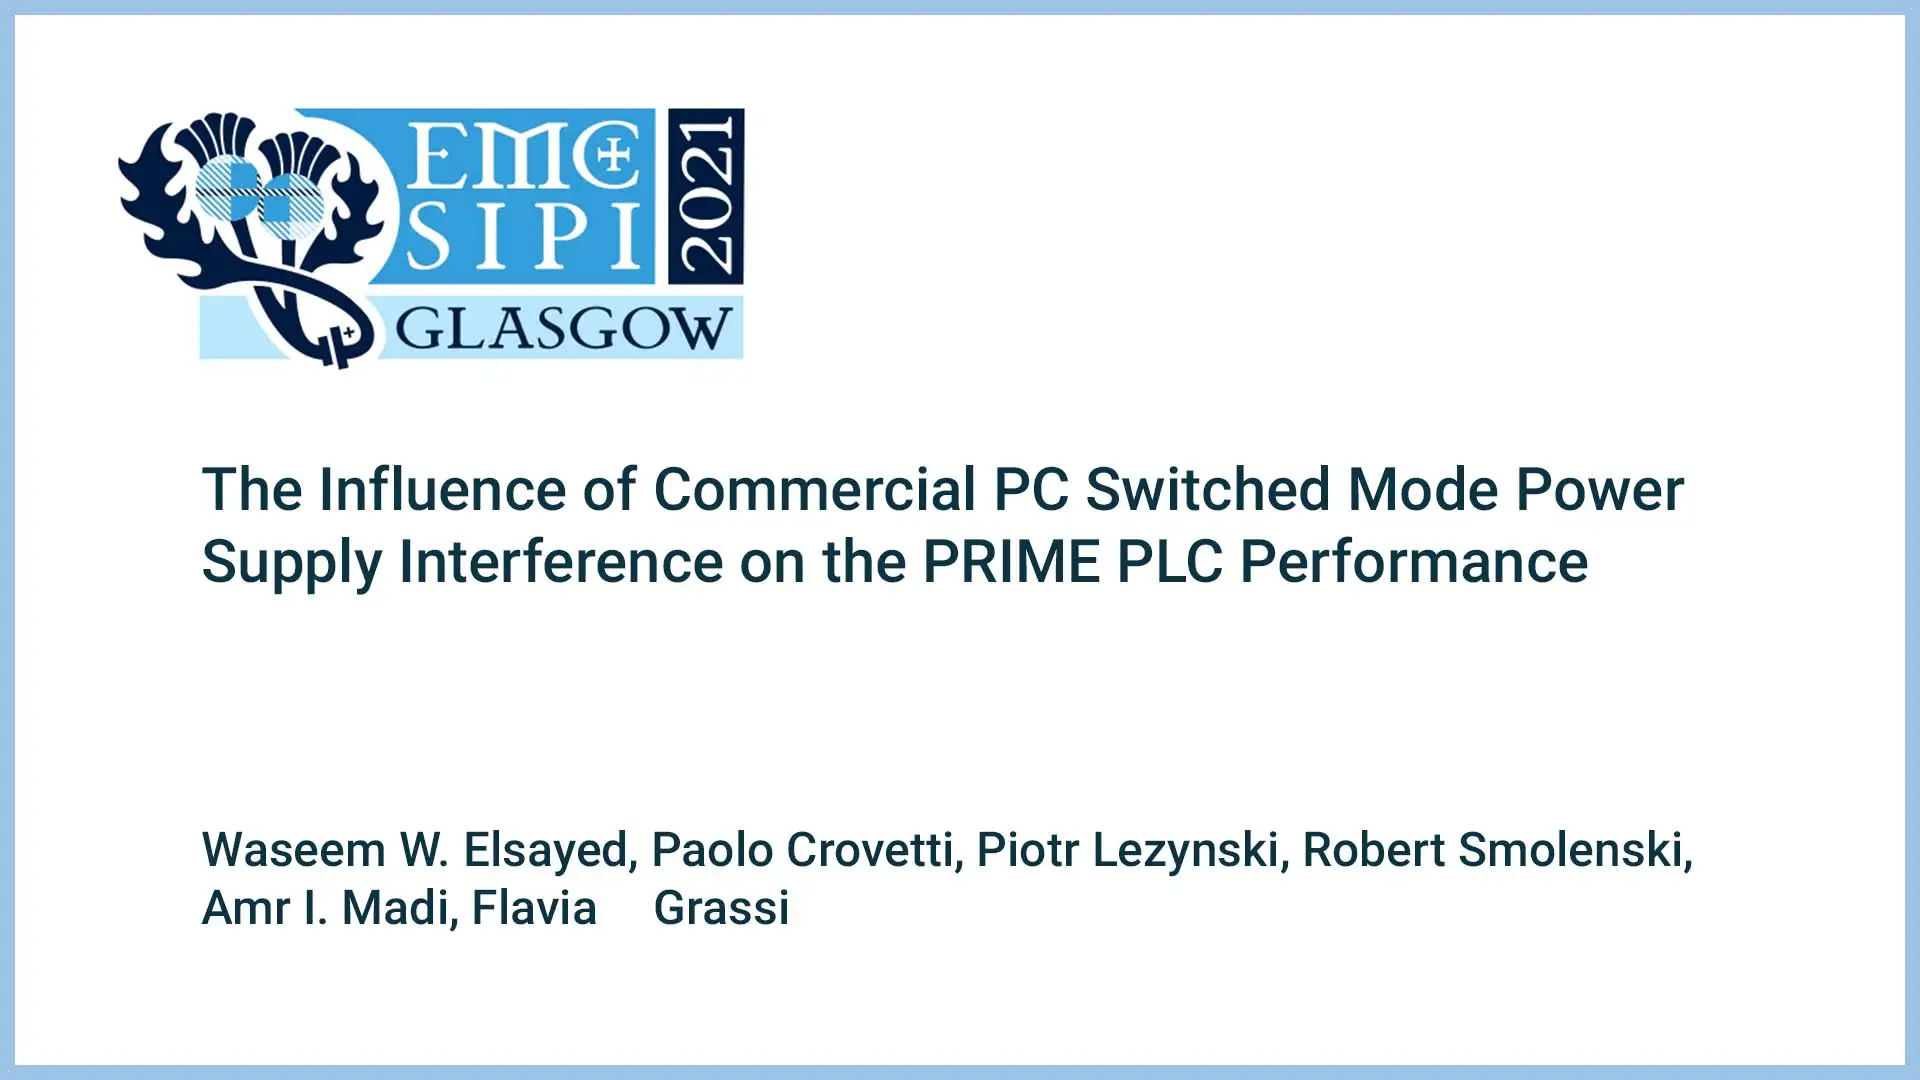 The Influence of Commercial PC Switched Mode Power Supply Interference on the PRIME PLC Performance